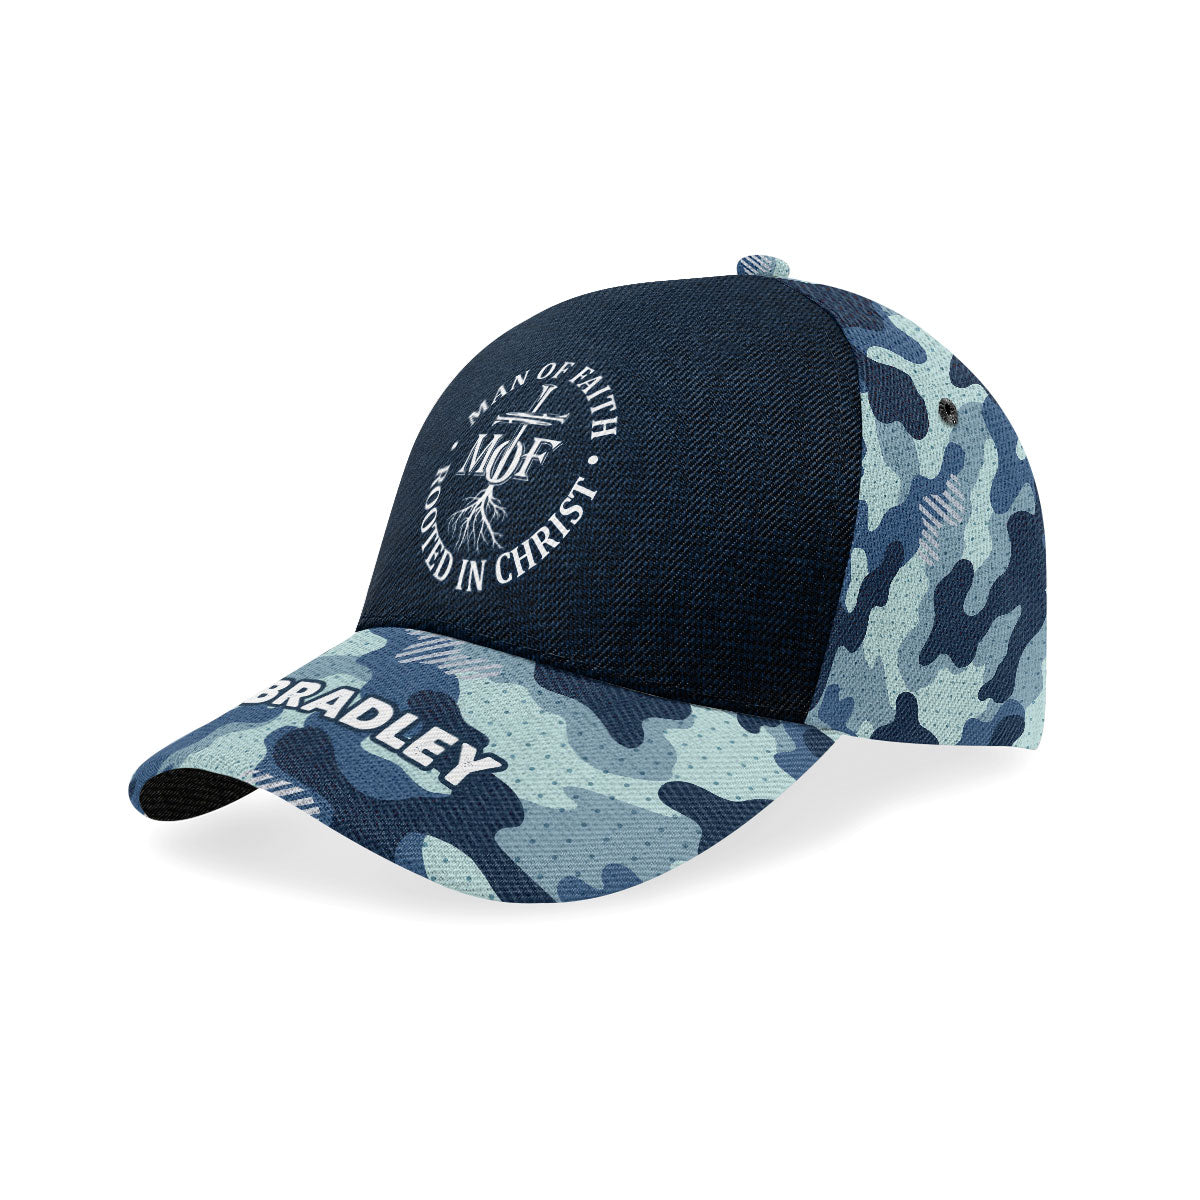 Man Of Faith Rooted In Christ | Personalized Classic Cap JSCCH878